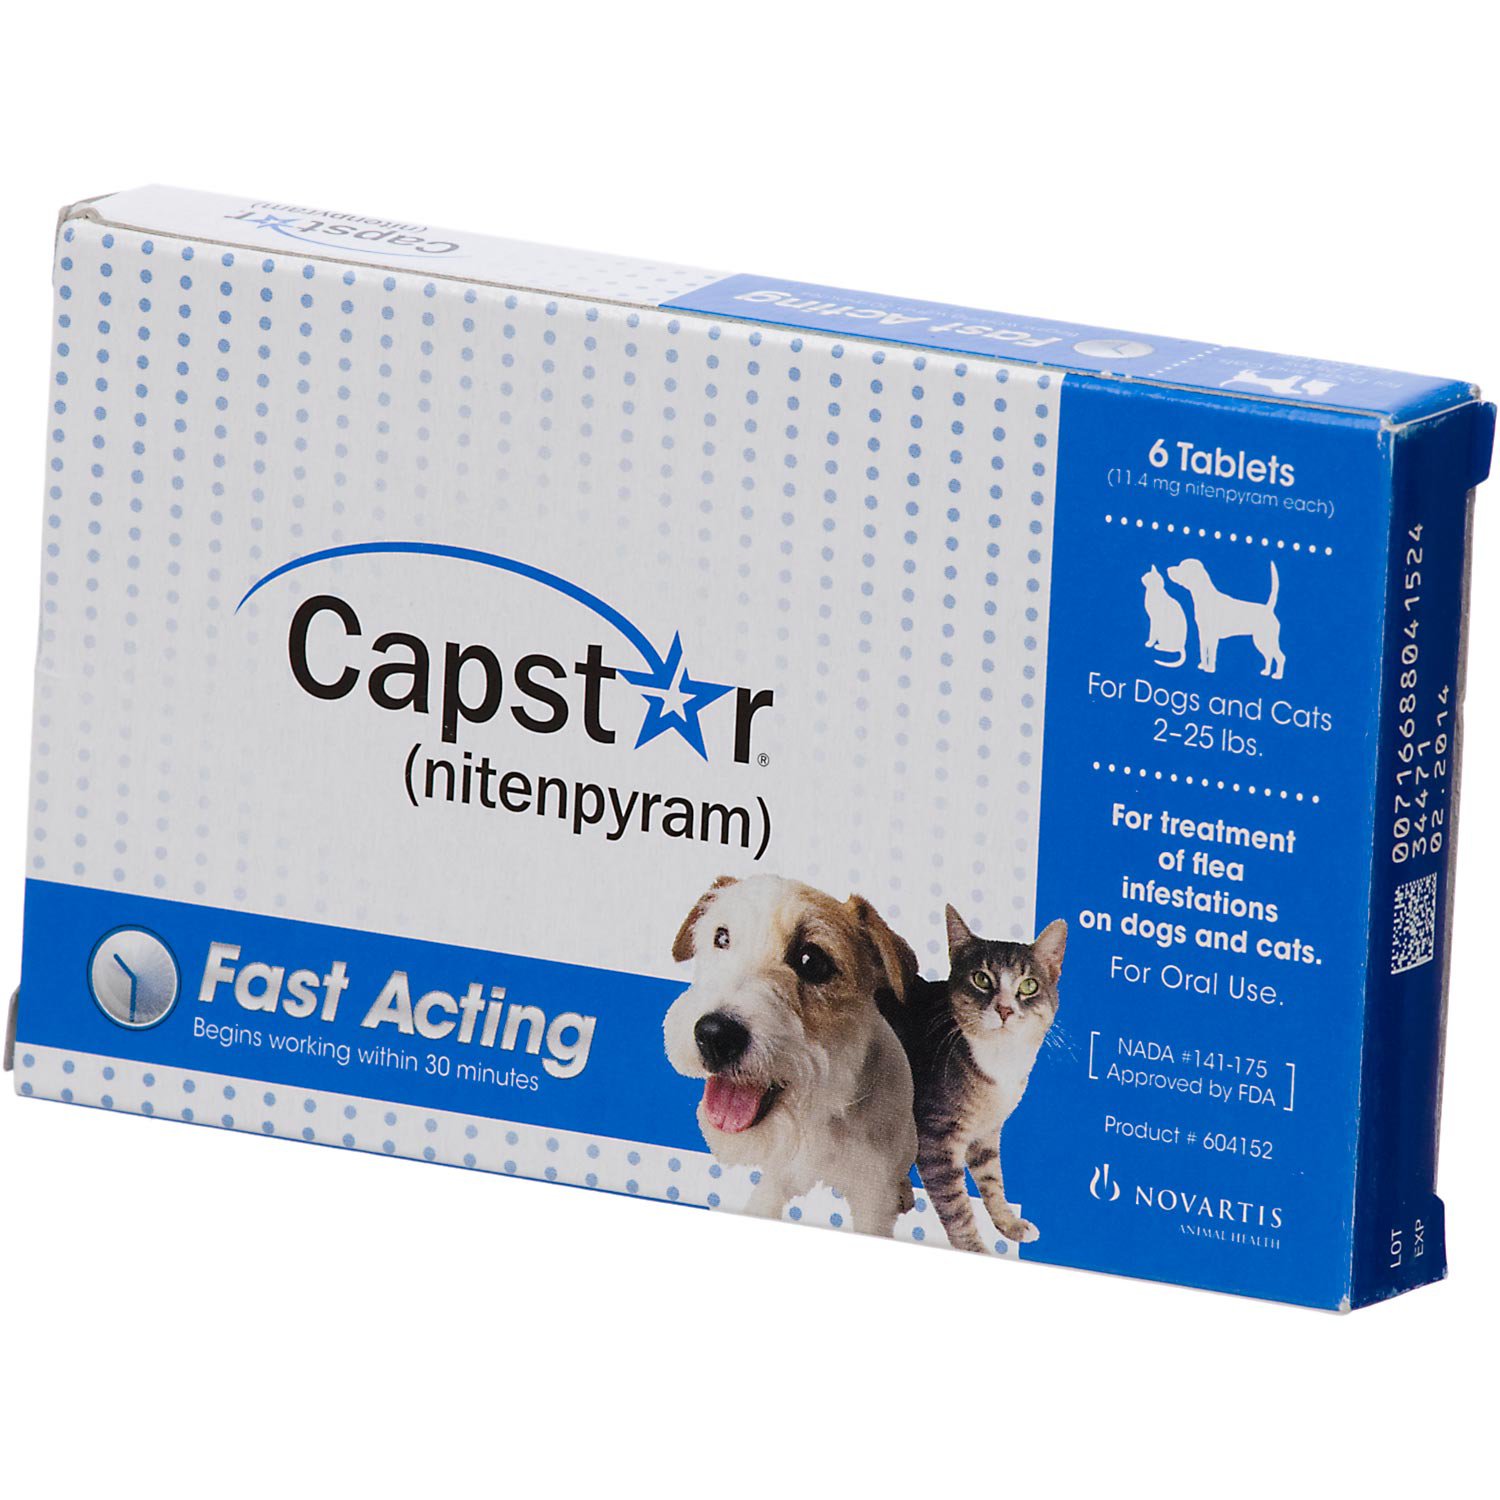 Capstar Flea Tablets for Dogs and Cats, 225lbs. Petco